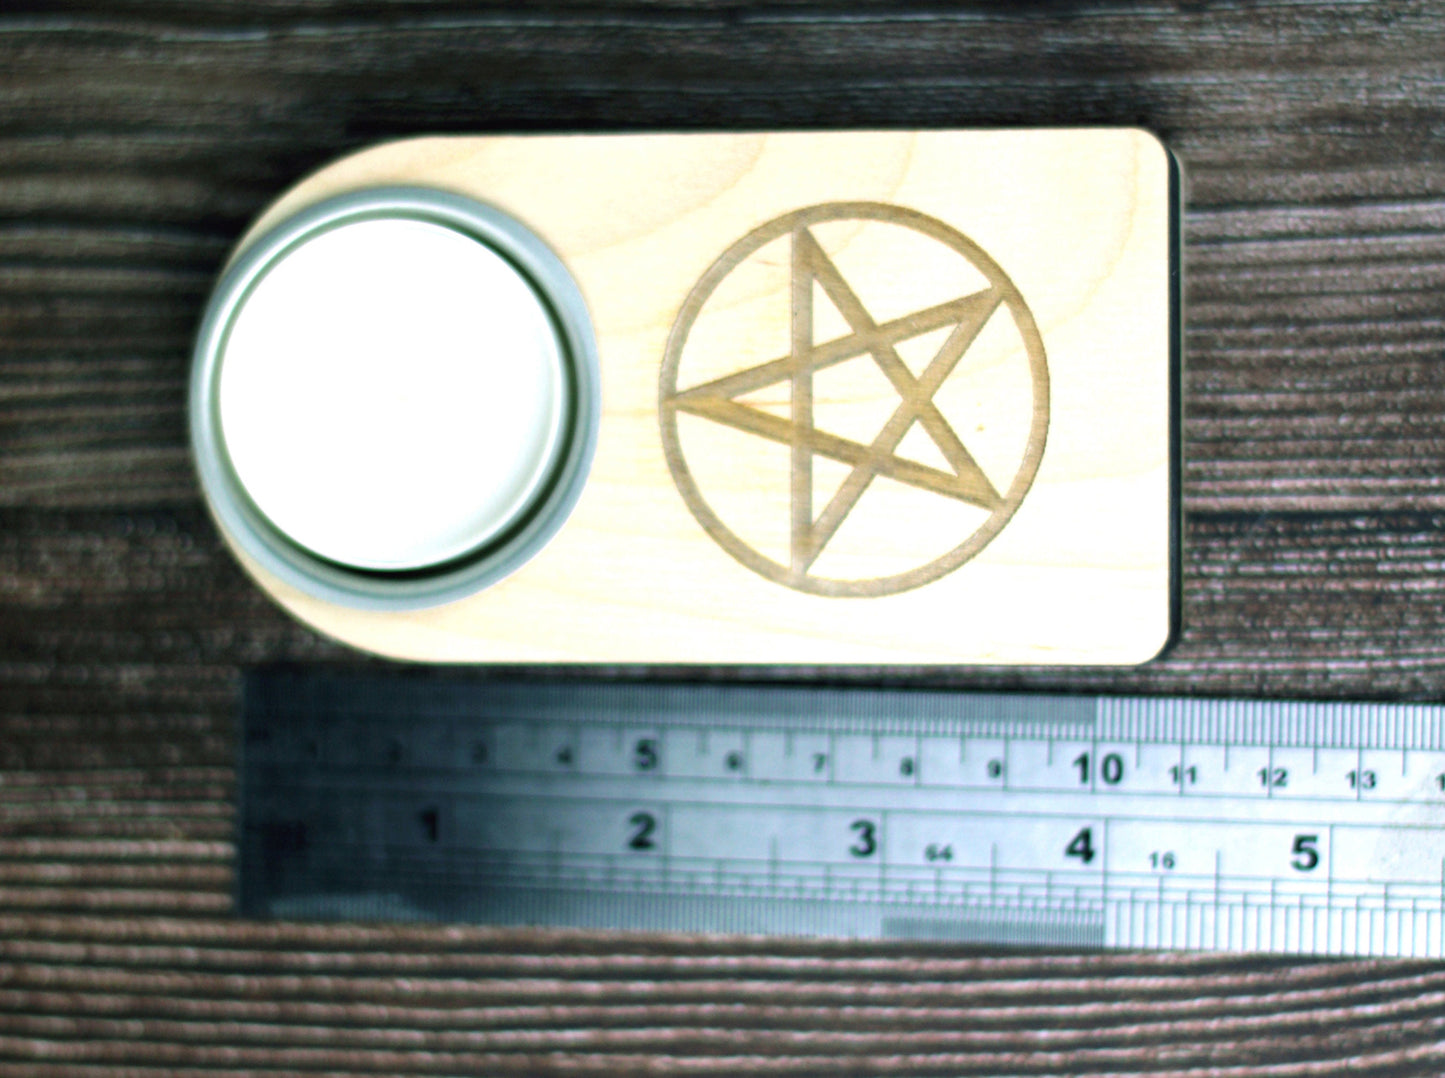 Wooden Wicca candle holder with engraved pentagram and secret compartment, it holds tea light candle or nightlight